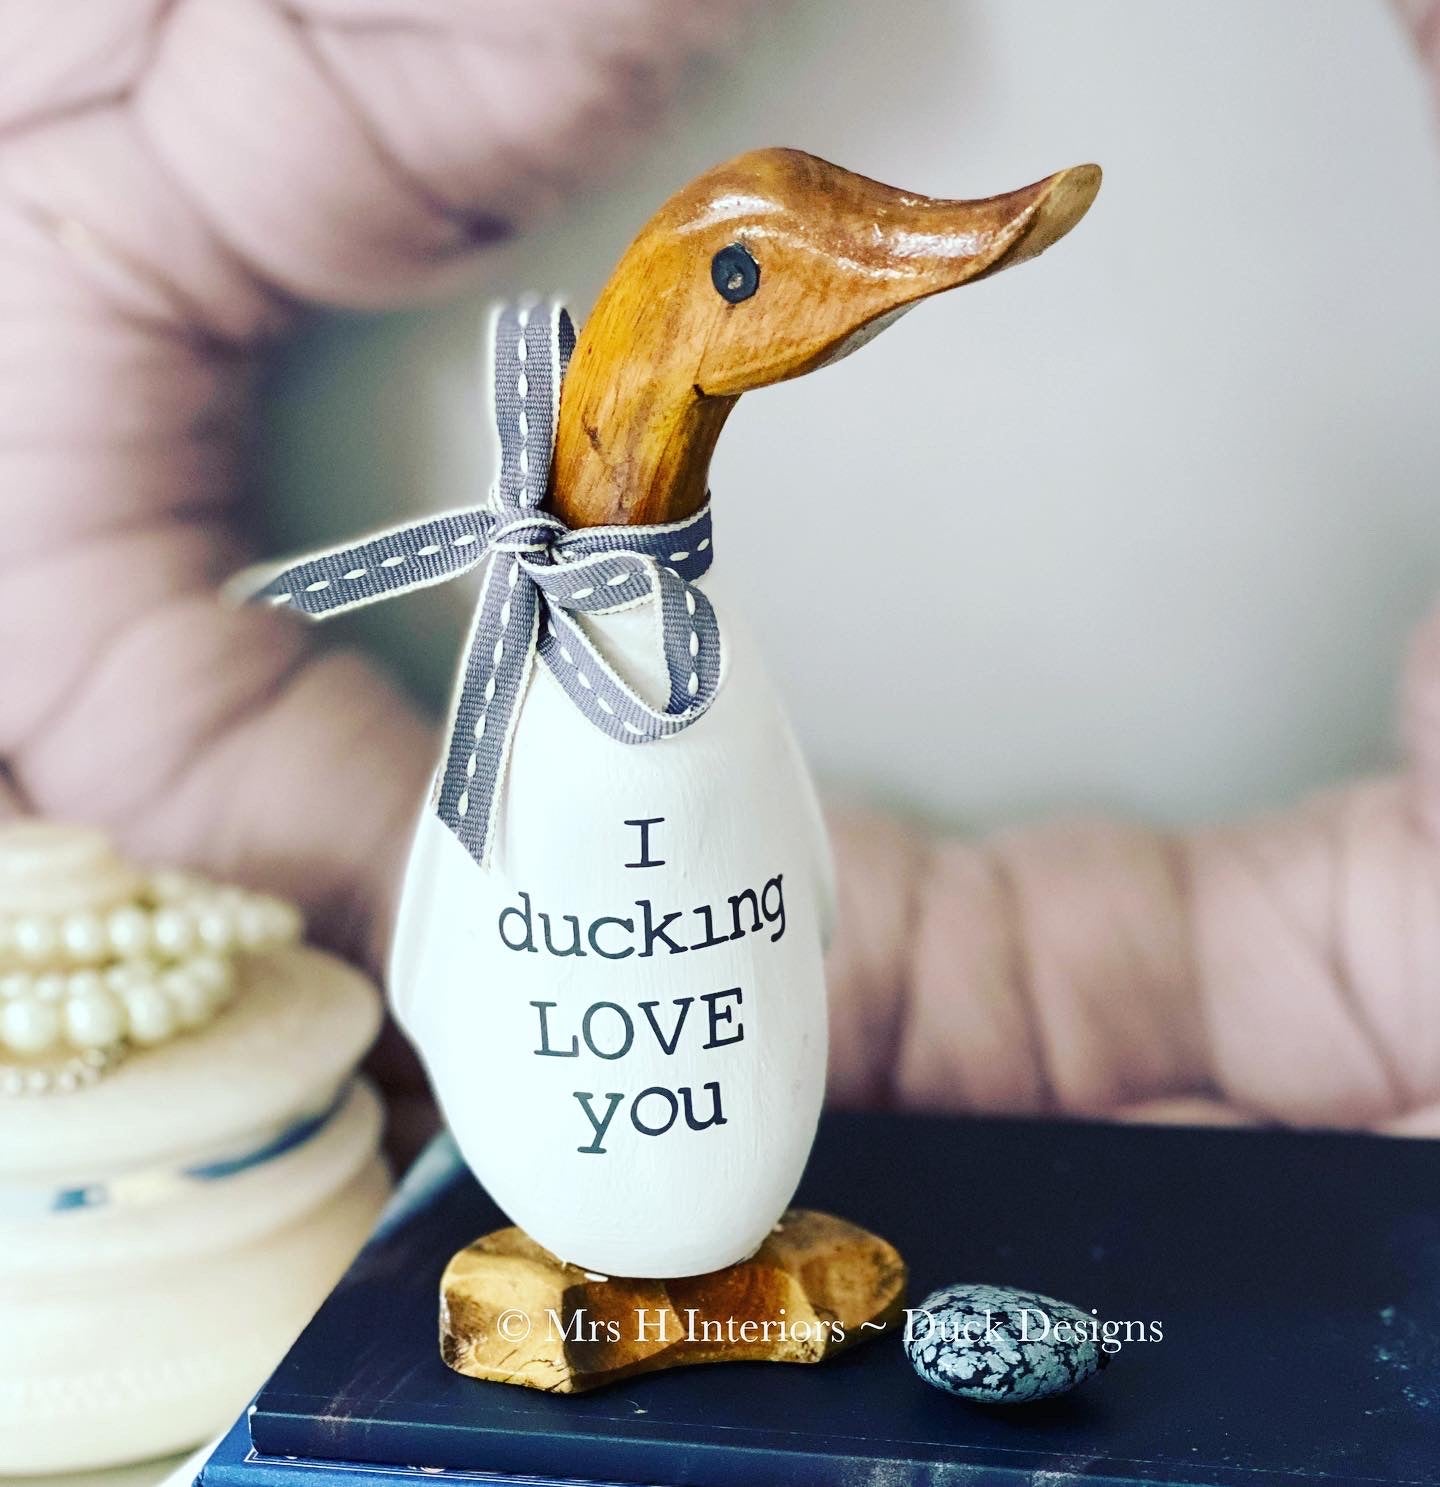 I ducking love you - Decorated Wooden Duck in Boots by Mrs H the Duck Lady